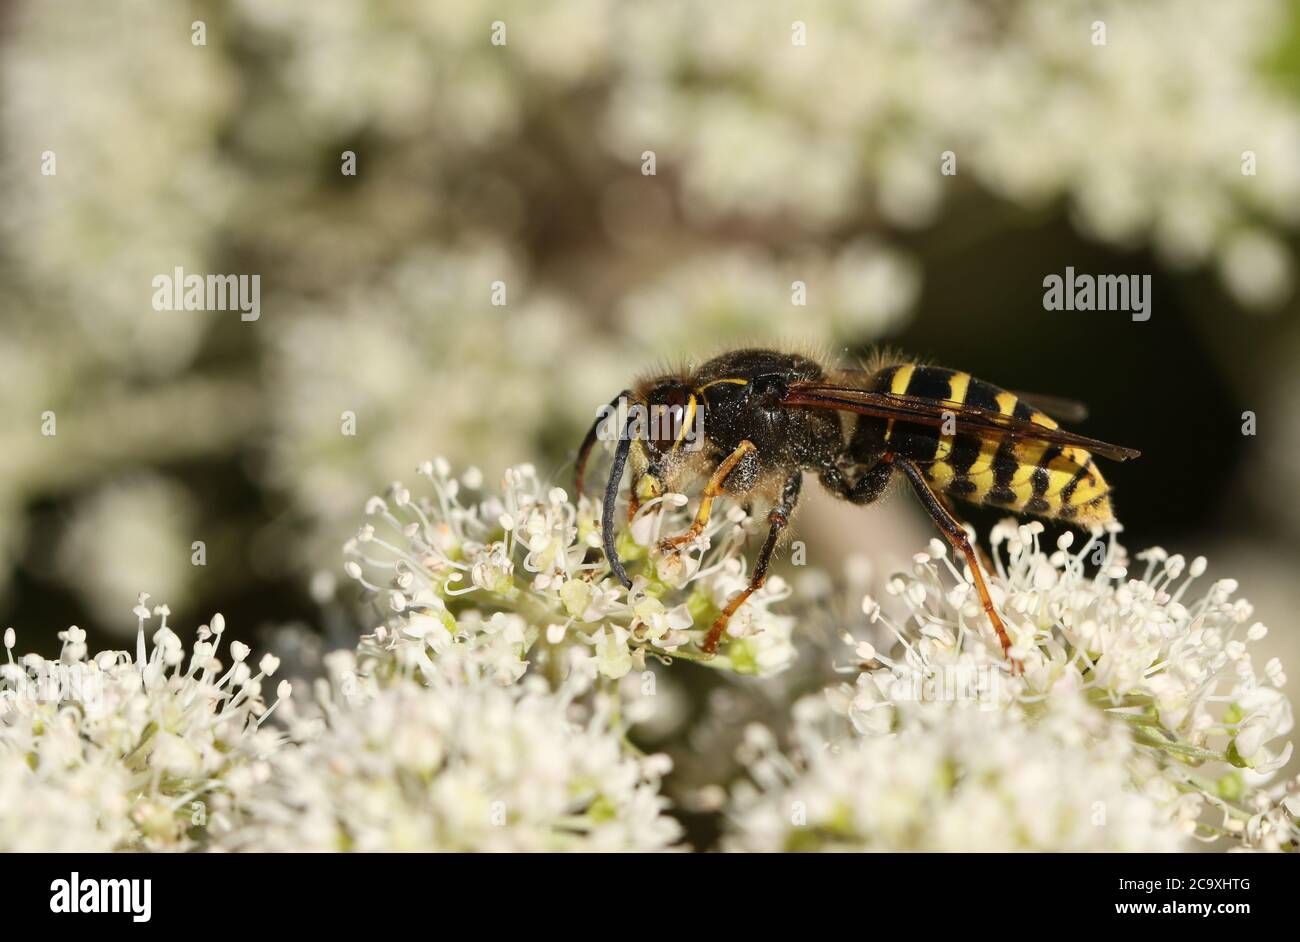 A Common Wasp, Vespula vulgaris, feeding on the pollen of a flower. Stock Photo